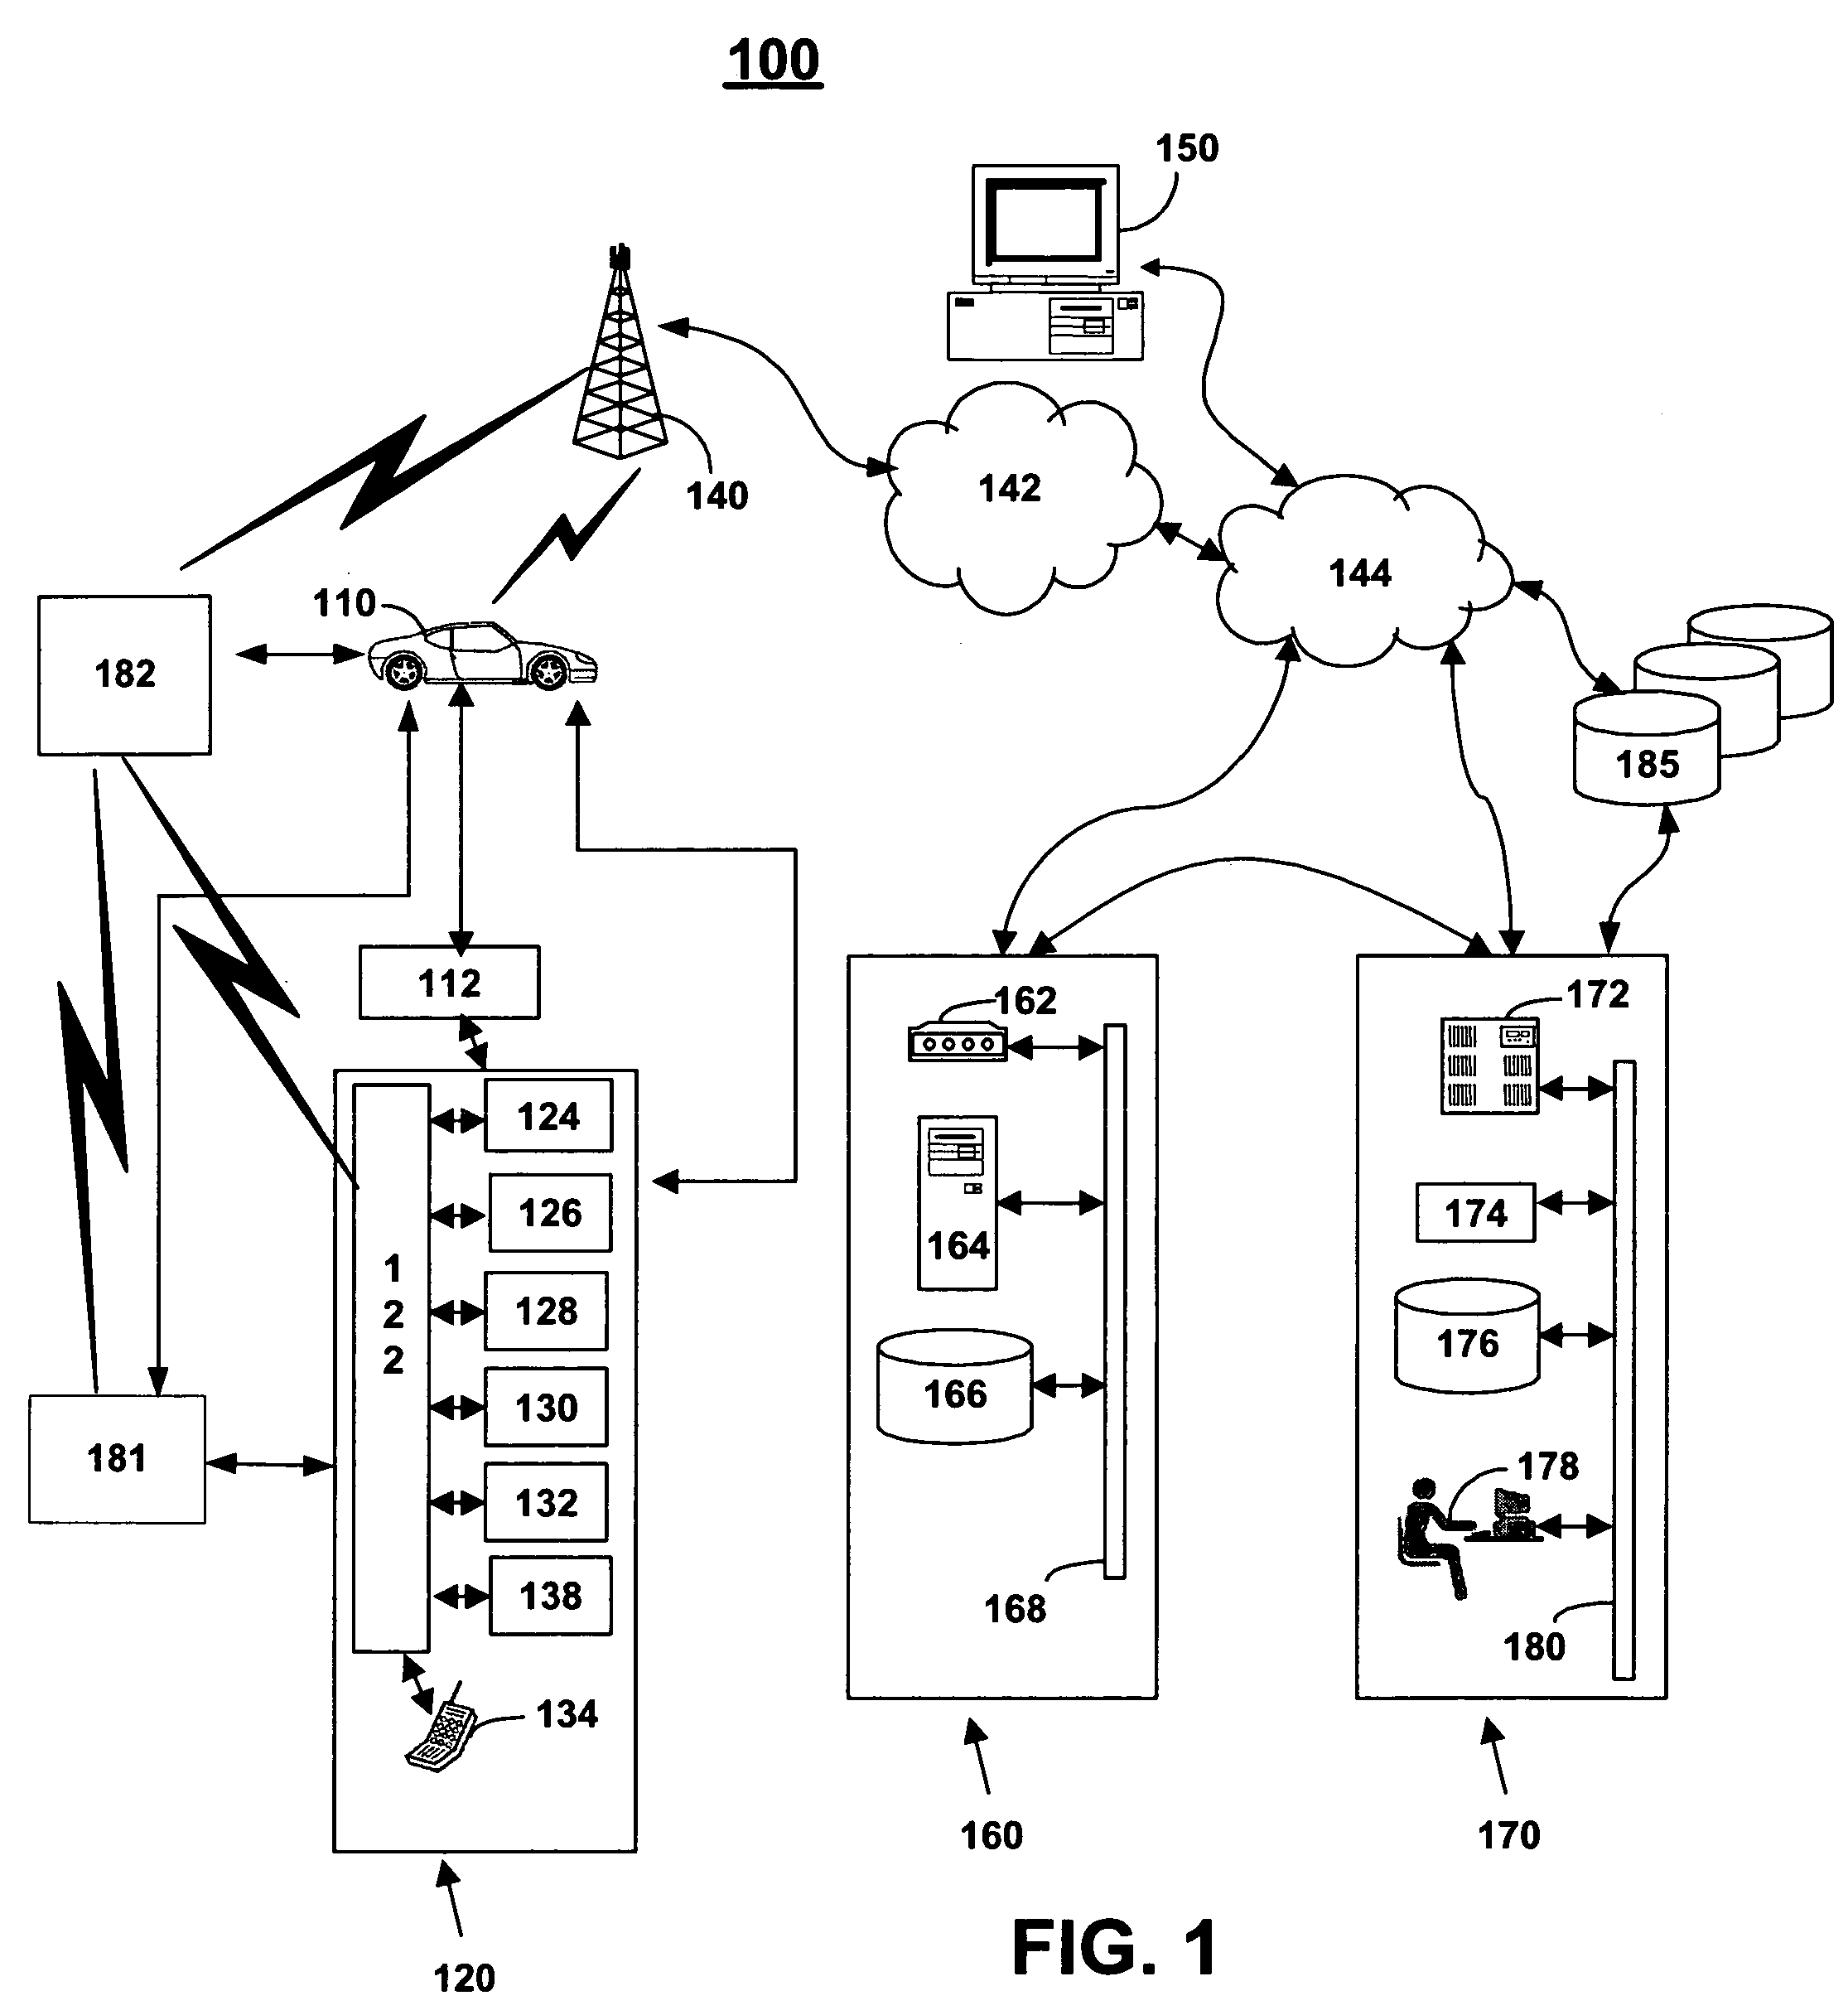 System and method for data storage and diagnostics in a portable communications device interfaced with a telematics unit